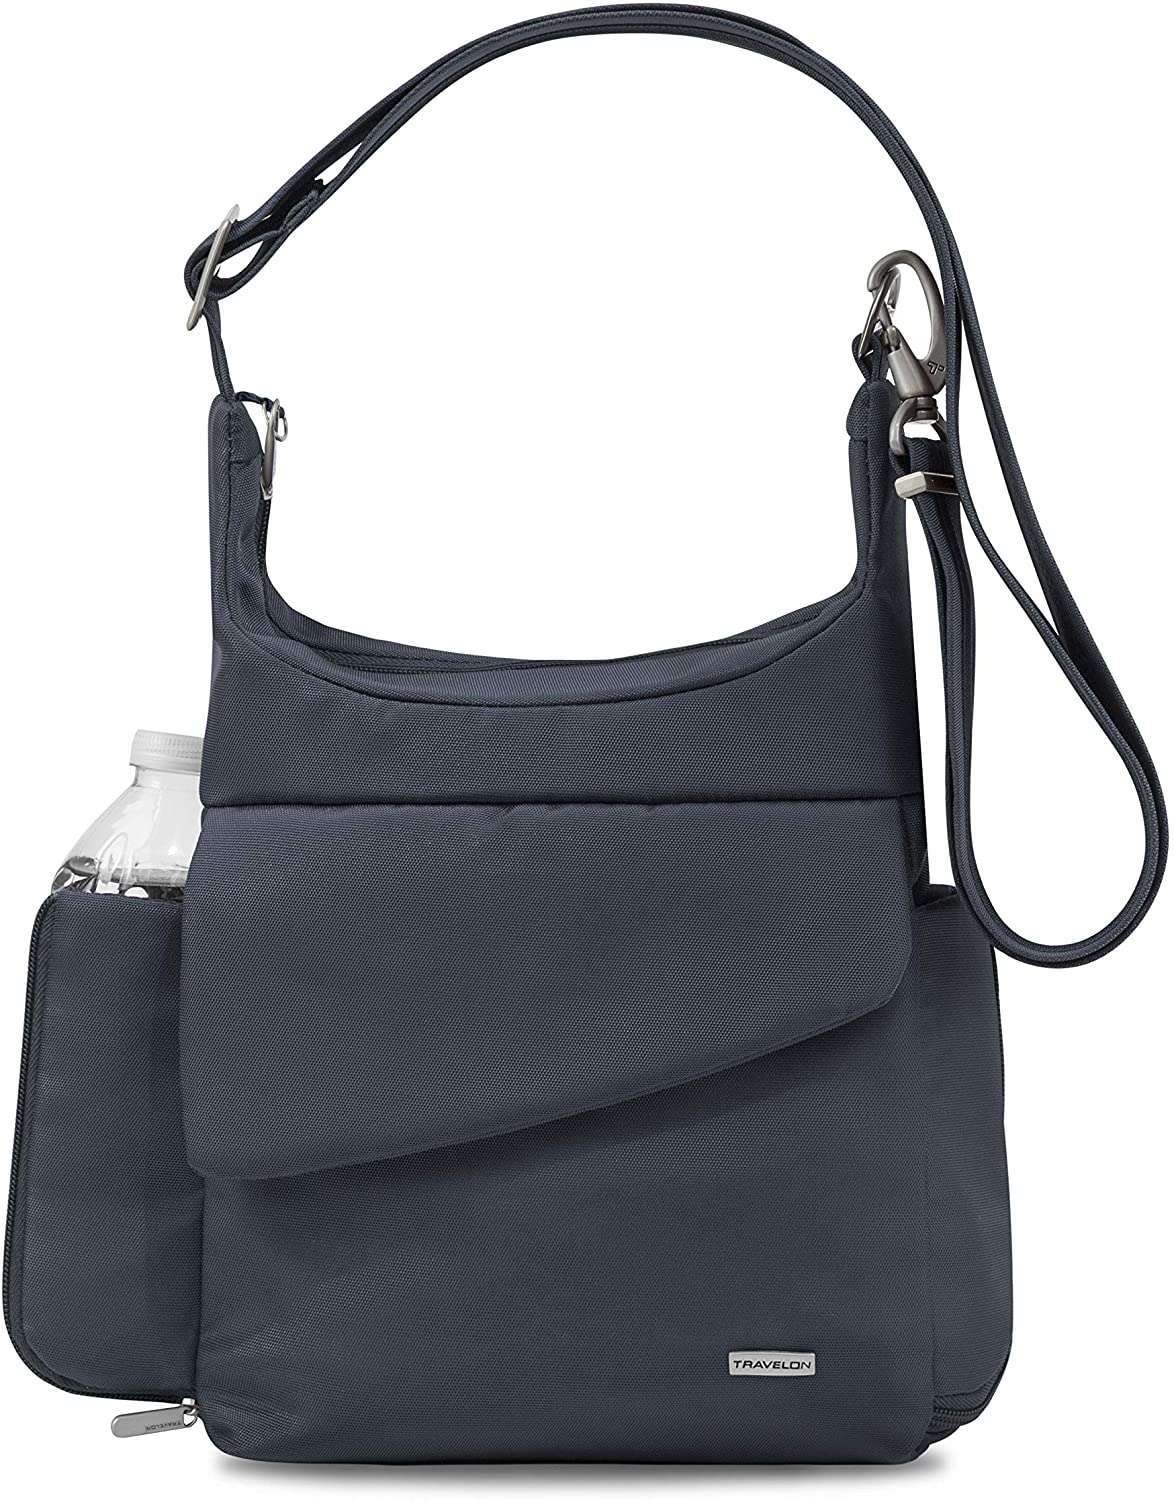 Classic Messenger Bag, Midnight, One Size